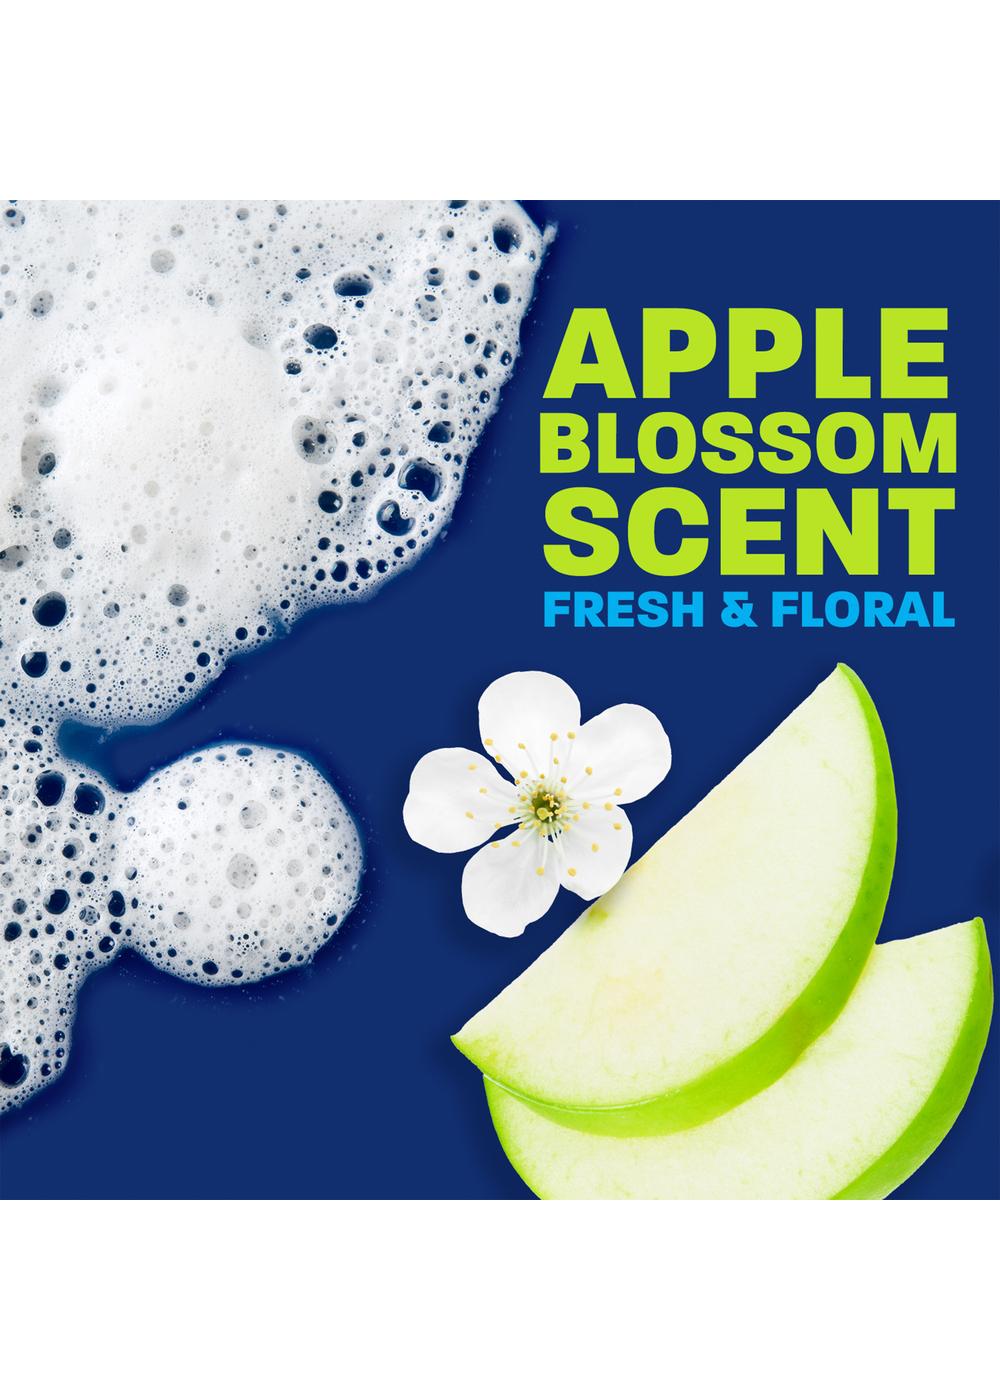 Dawn Ultra Antibacterial Hand Soap - Apple Blossom; image 7 of 10